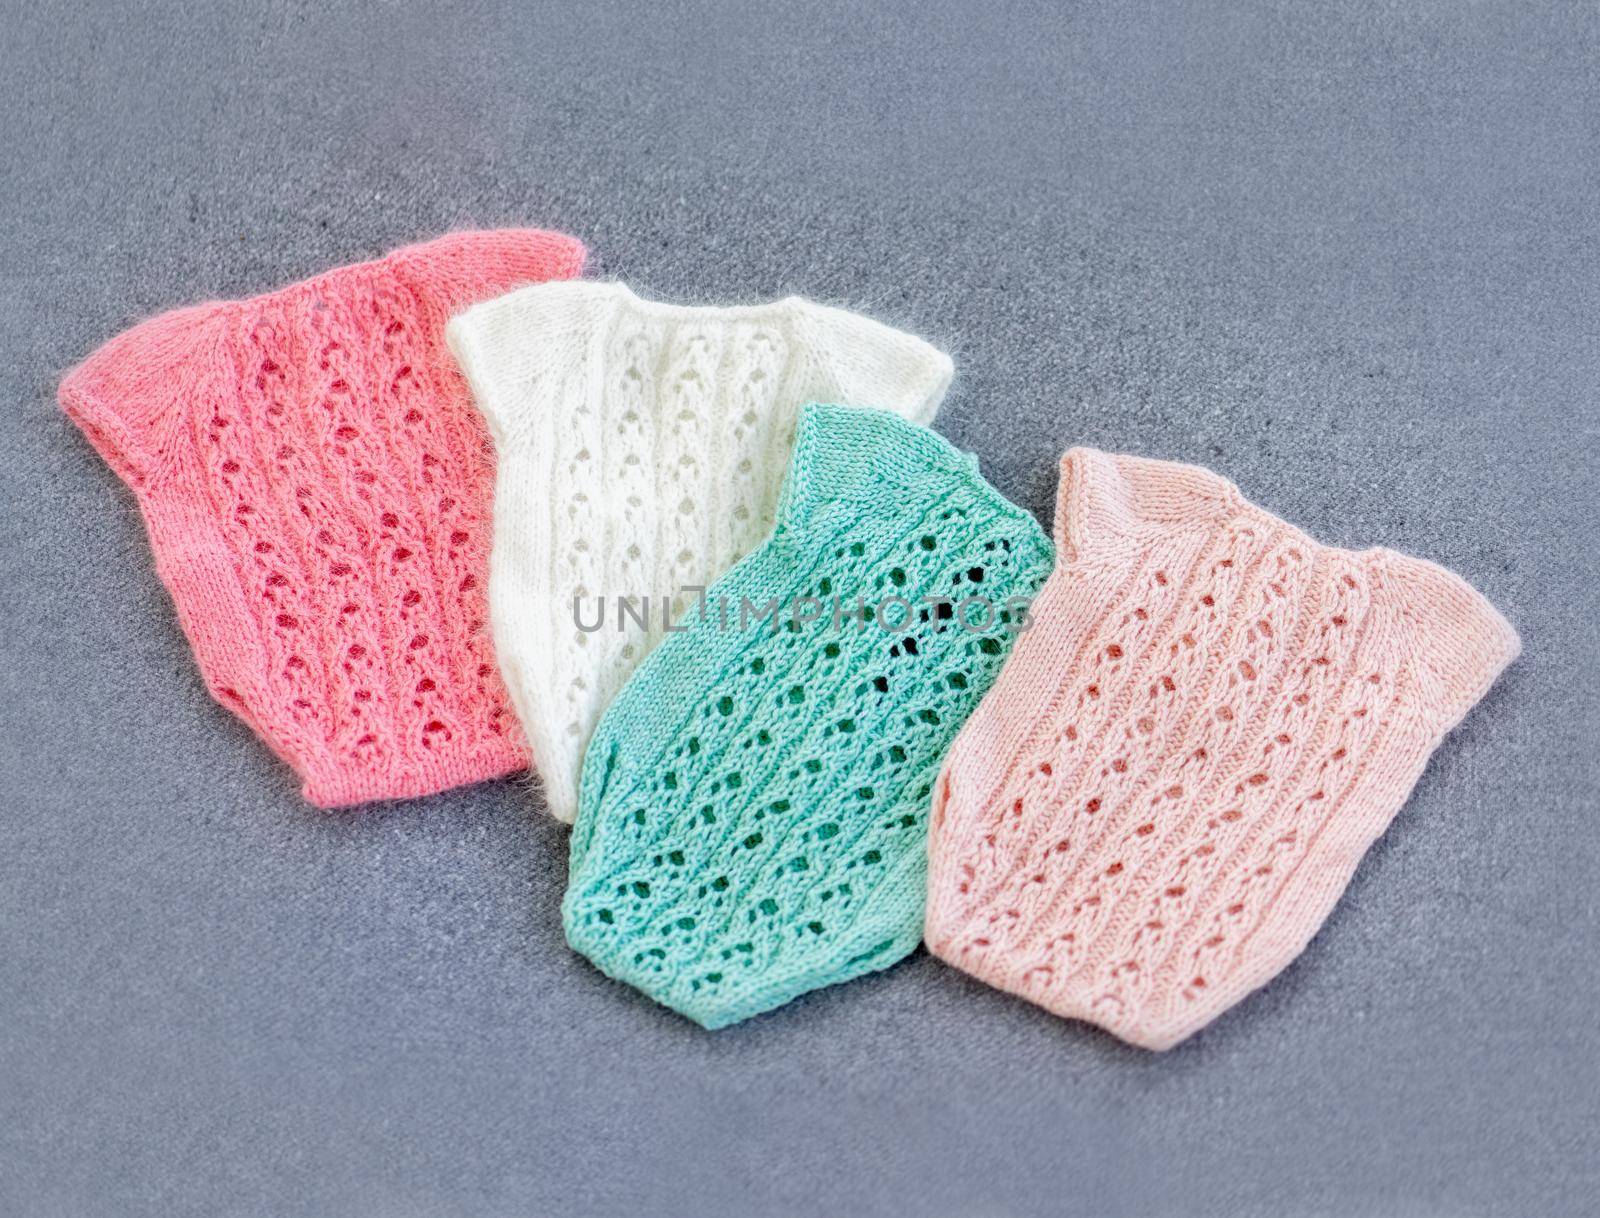 knitted newborn baby clothes composed on the woolen background